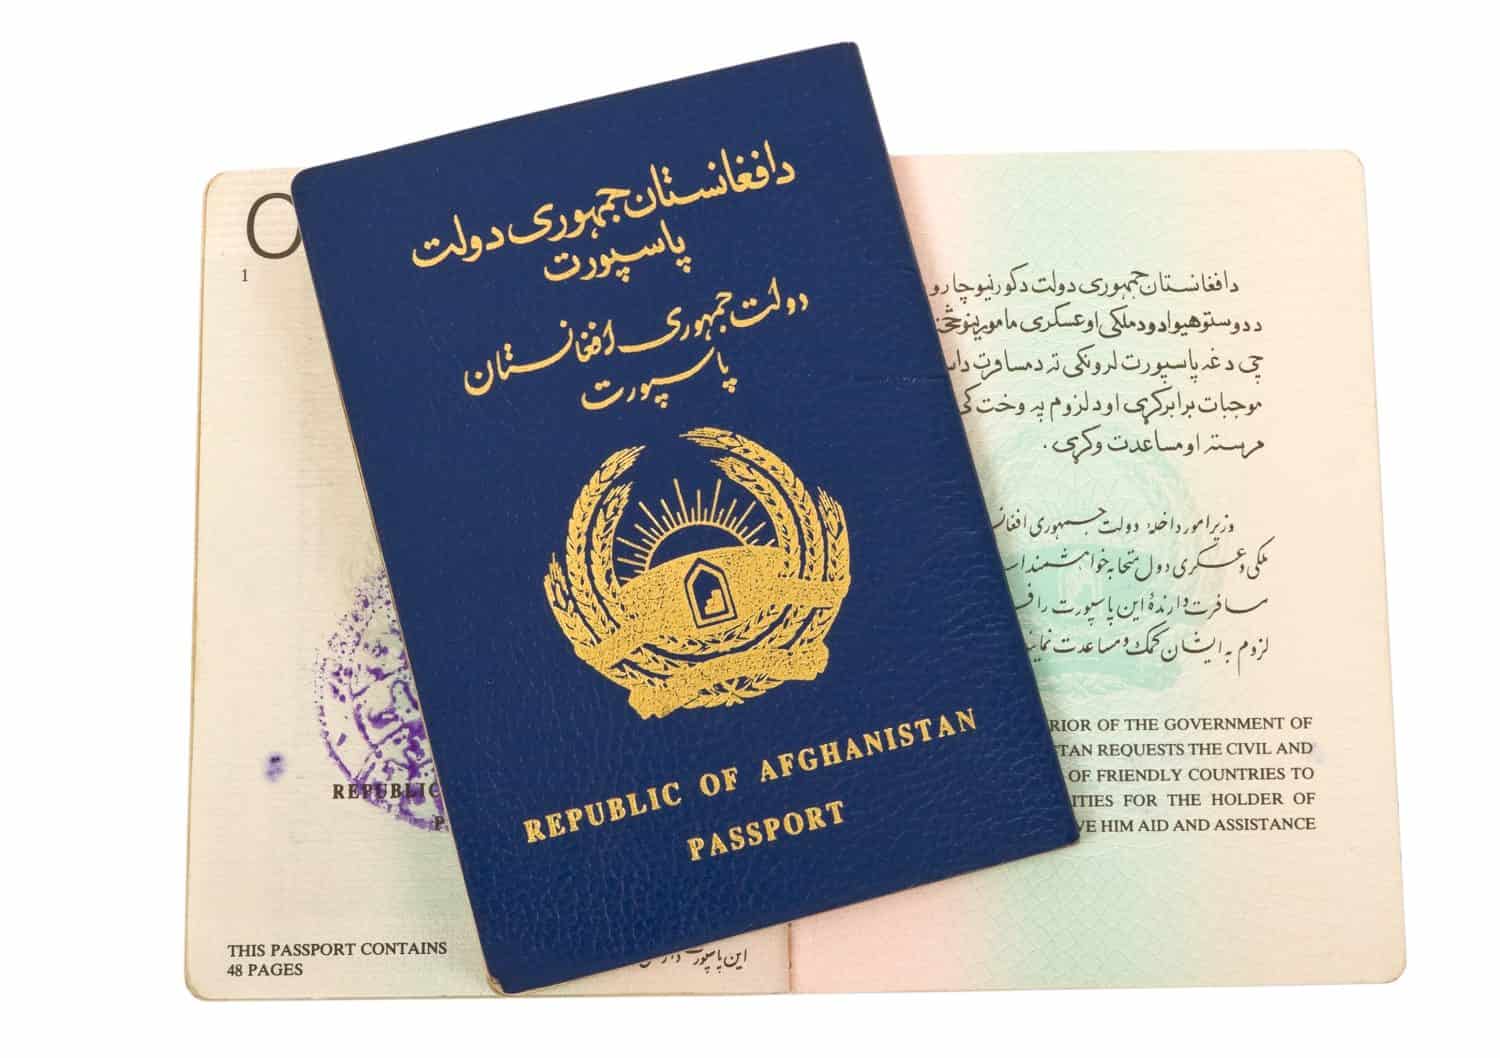 <p>In case you're wondering about the 10 weakest passports, here is a list of the 10 countries offering the least access to other countries. Of course, some of these passports do give citizens access to countries that are off-limits to Westerners. </p>    <p>10. North Korea (42)</p>    <p>9. Libya (40)</p>    <p>8. Palestinian Territories (41)</p>    <p>7. Nepal and Libya (40)</p>    <p>6. Somalia (36)</p>    <p>5. Yemen (35)</p>    <p>4. Pakistan (34)</p>    <p>3. Iraq (31)</p>    <p>2. Syria (29)</p>    <p>1. Afghanistan (28)</p><p>Sharks, lions, alligators, and more! Don’t miss today’s latest and most exciting animal news. <strong><a href="https://www.msn.com/en-us/channel/source/AZ%20Animals%20US/sr-vid-7etr9q8xun6k6508c3nufaum0de3dqktiq6h27ddeagnfug30wka">Click here to access the A-Z Animals profile page</a> and be sure to hit the <em>Follow</em> button here or at the top of this article!</strong></p> <p>Have feedback? Add a comment below!</p>